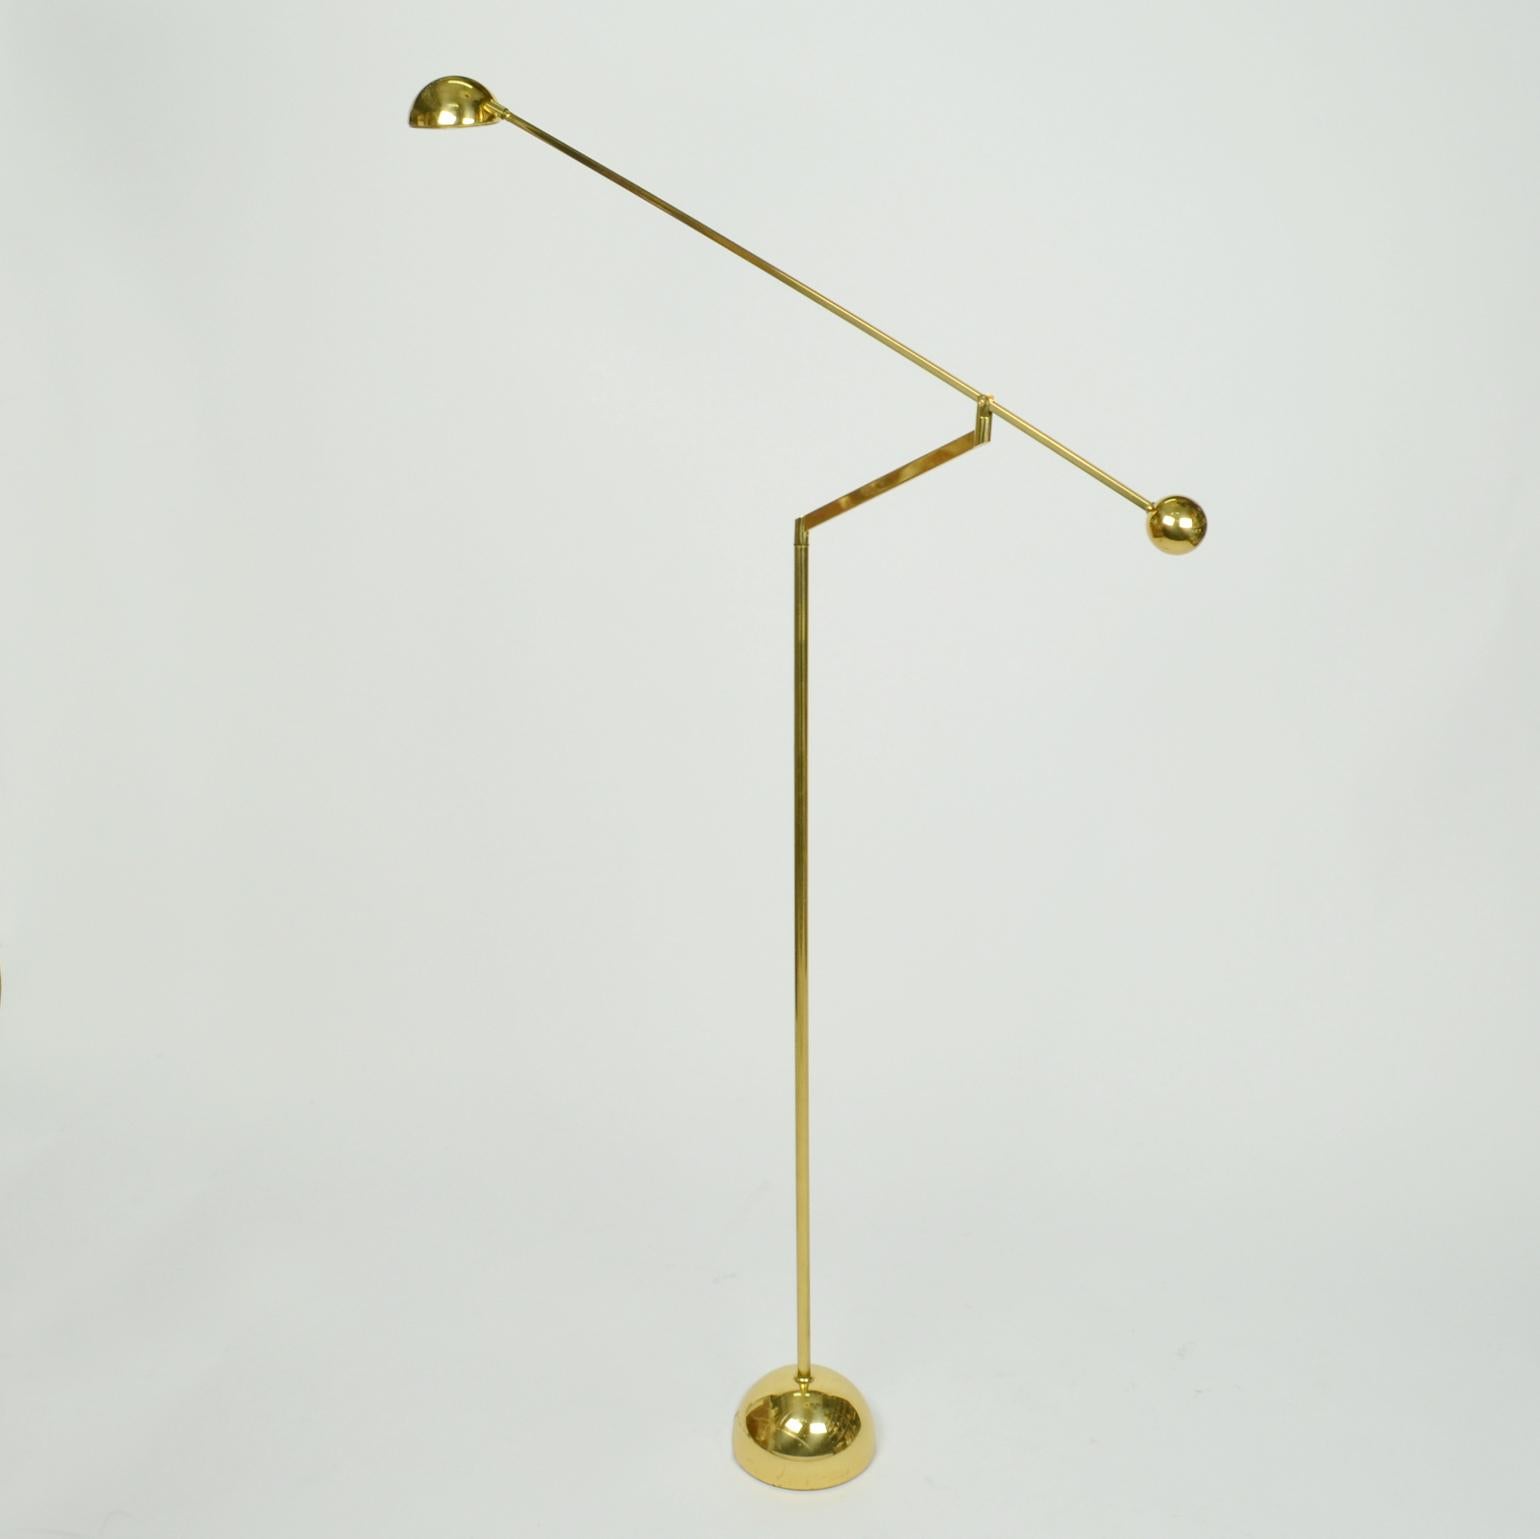 Pair of brass minimalist counterbalance floor lamps are super flexible, with an arm adjustable to 180 degrees. The halogen light source is attached to a long arm holding a spherical counter weight. The arm sits on an angled stand with counter